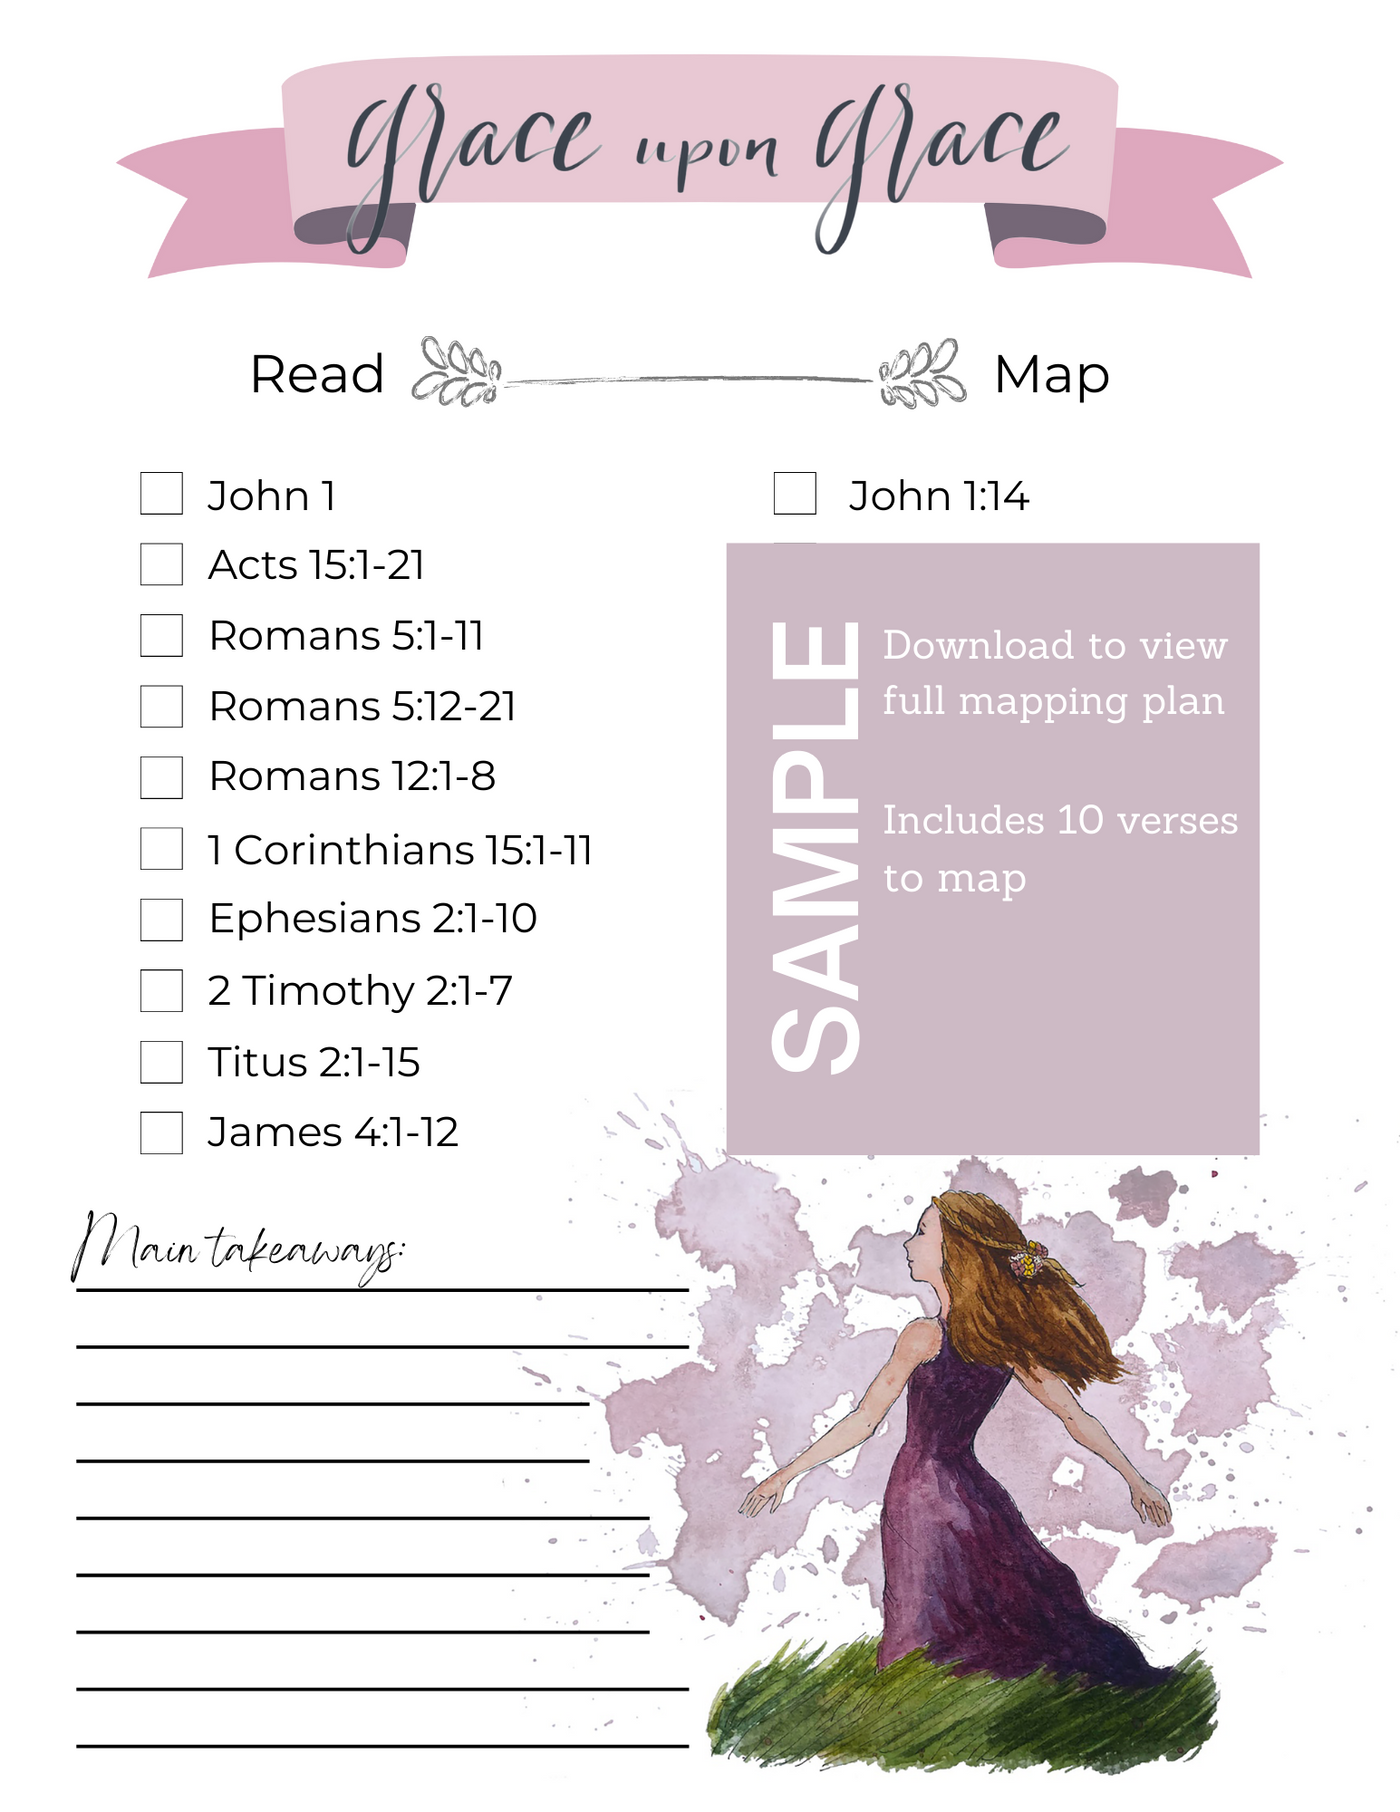 'Grace Upon Grace' Mapping Plan